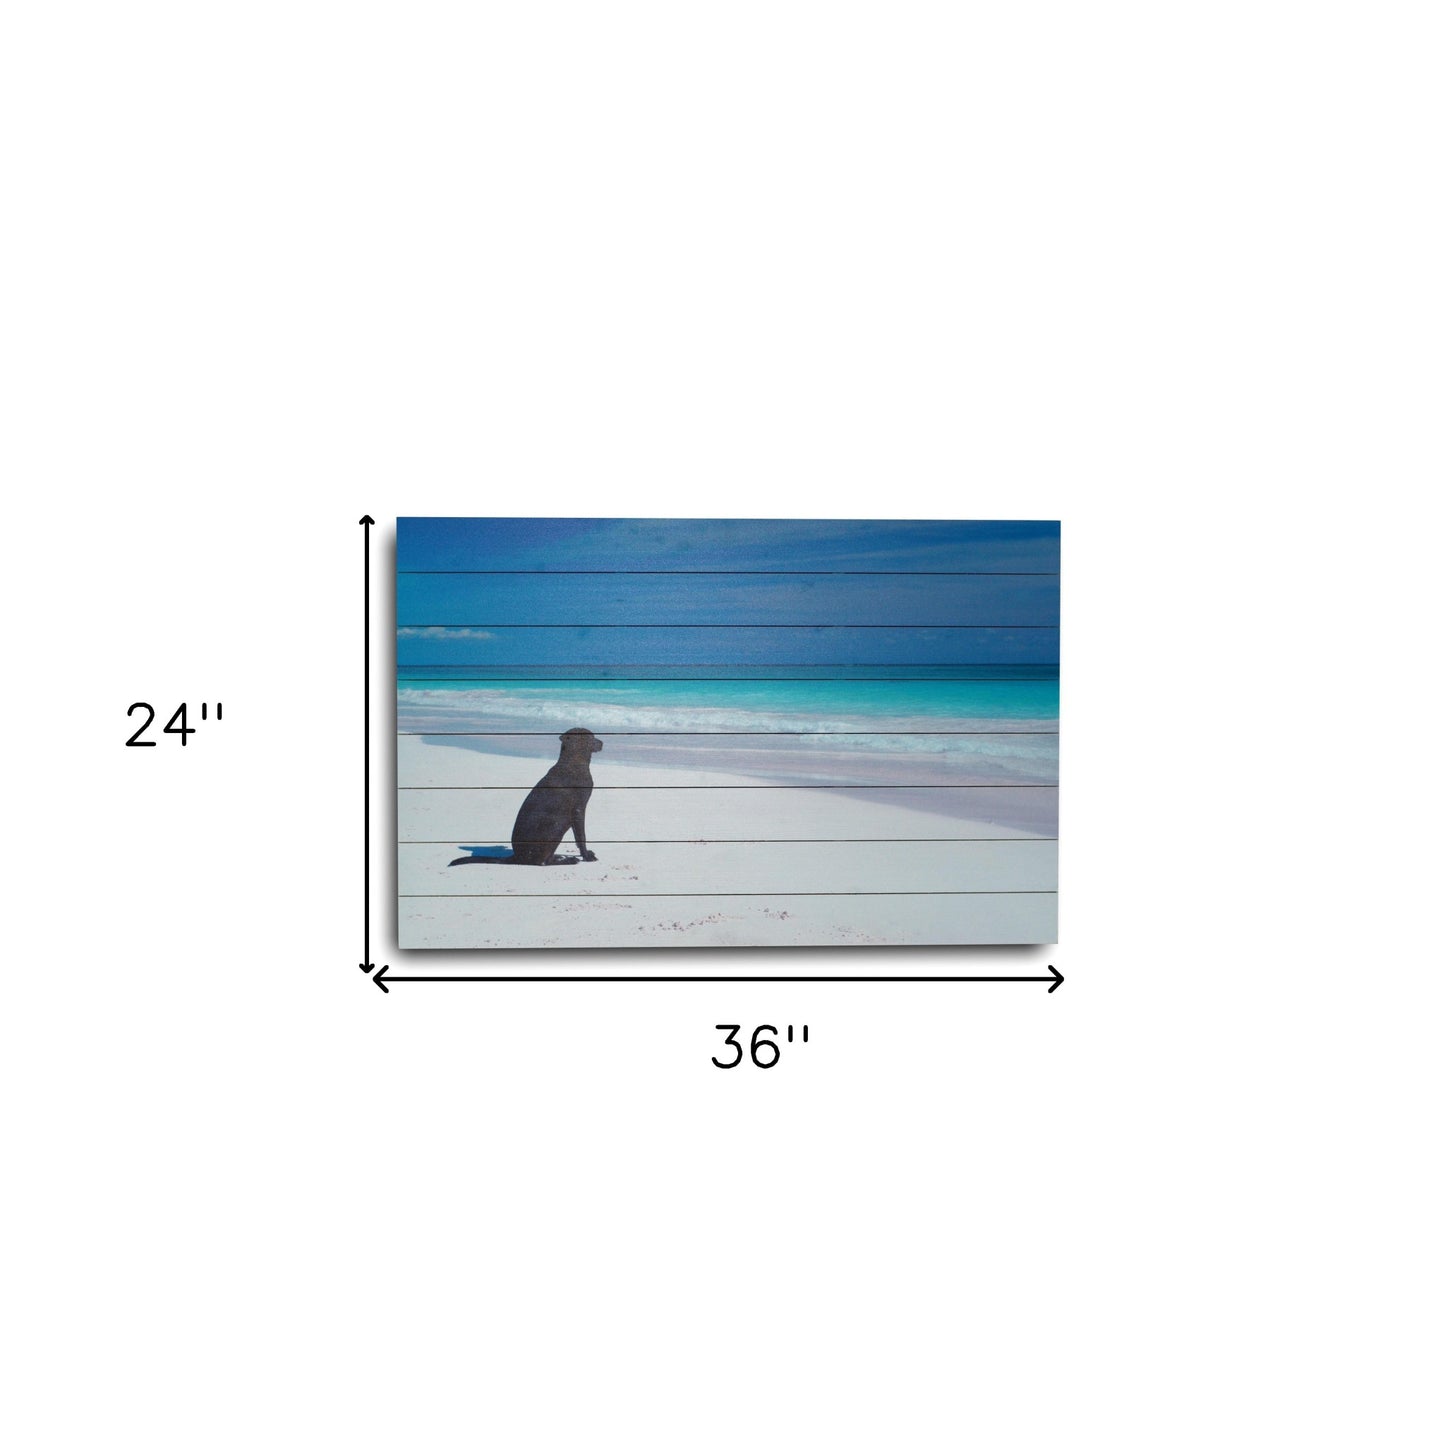 Energetic Dog At The Beach Unframed Photograph Wall Art